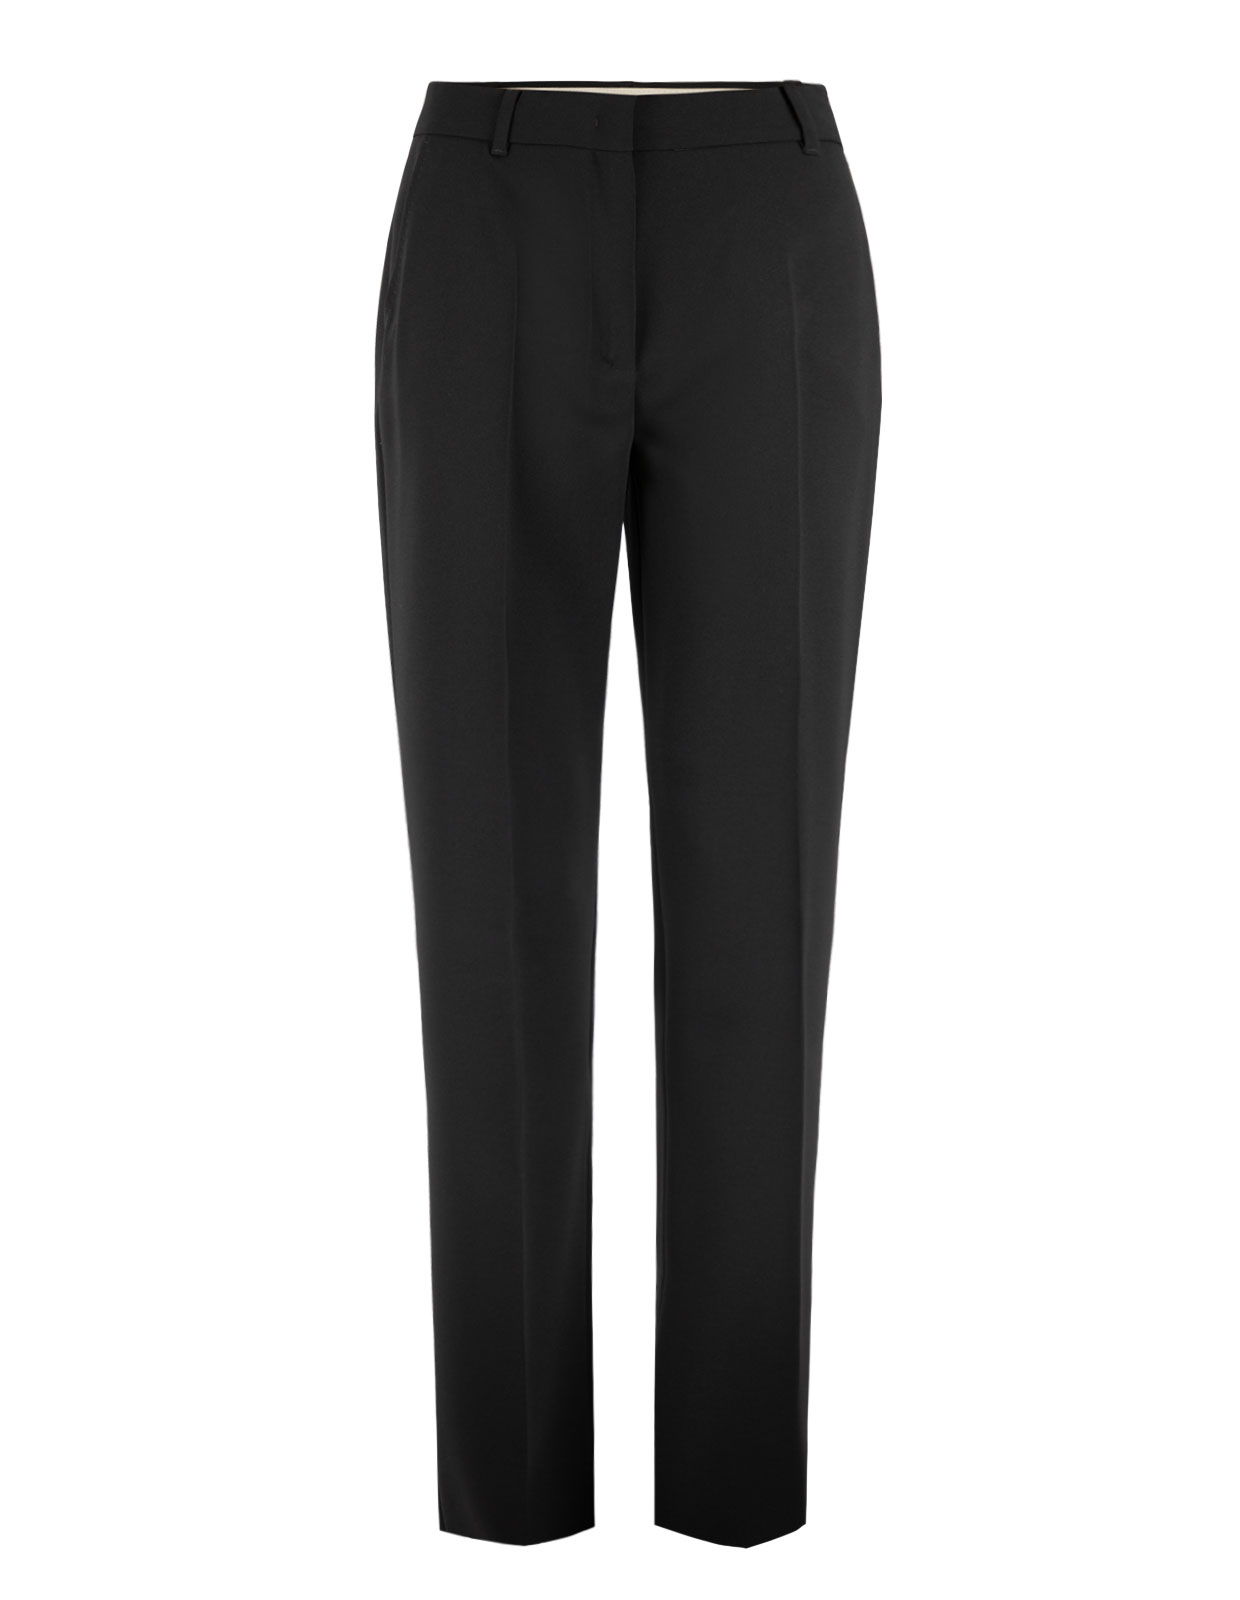 Manager Trousers Black